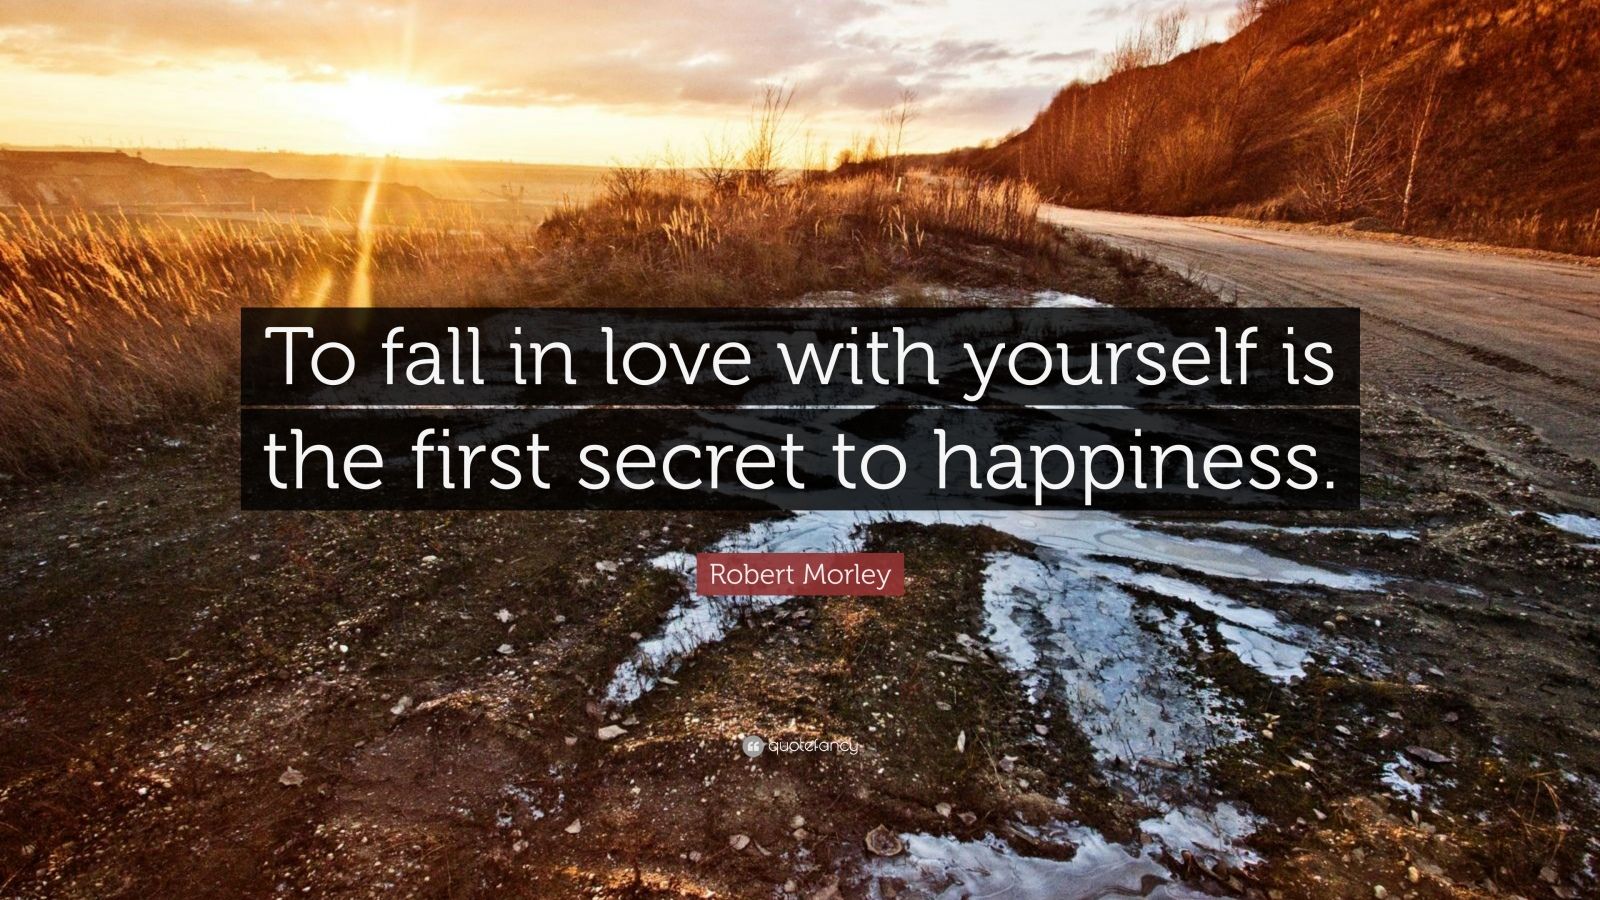 Robert Morley Quote: “To fall in love with yourself is the first secret